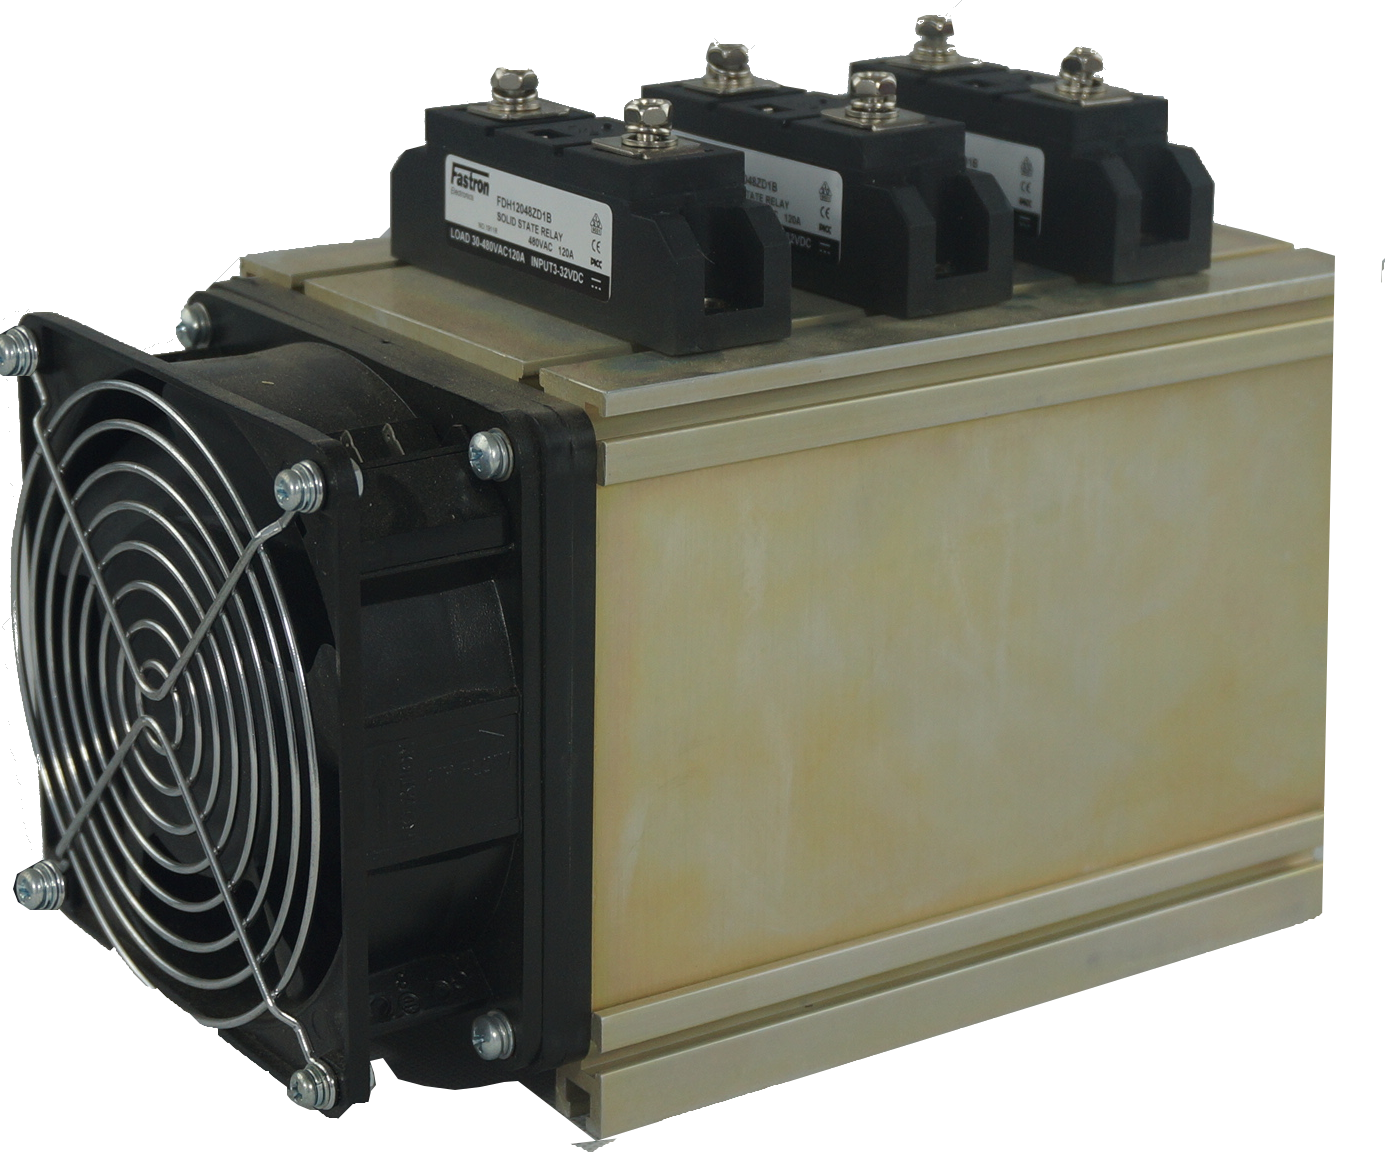 F135 Series Panel Mount 3 Phase Solid State Contactors, 13 to 240 Amp per Phase, 70-480VAC Switching, 90-280VAC or 4-32VDC Control Contactor Style Modules